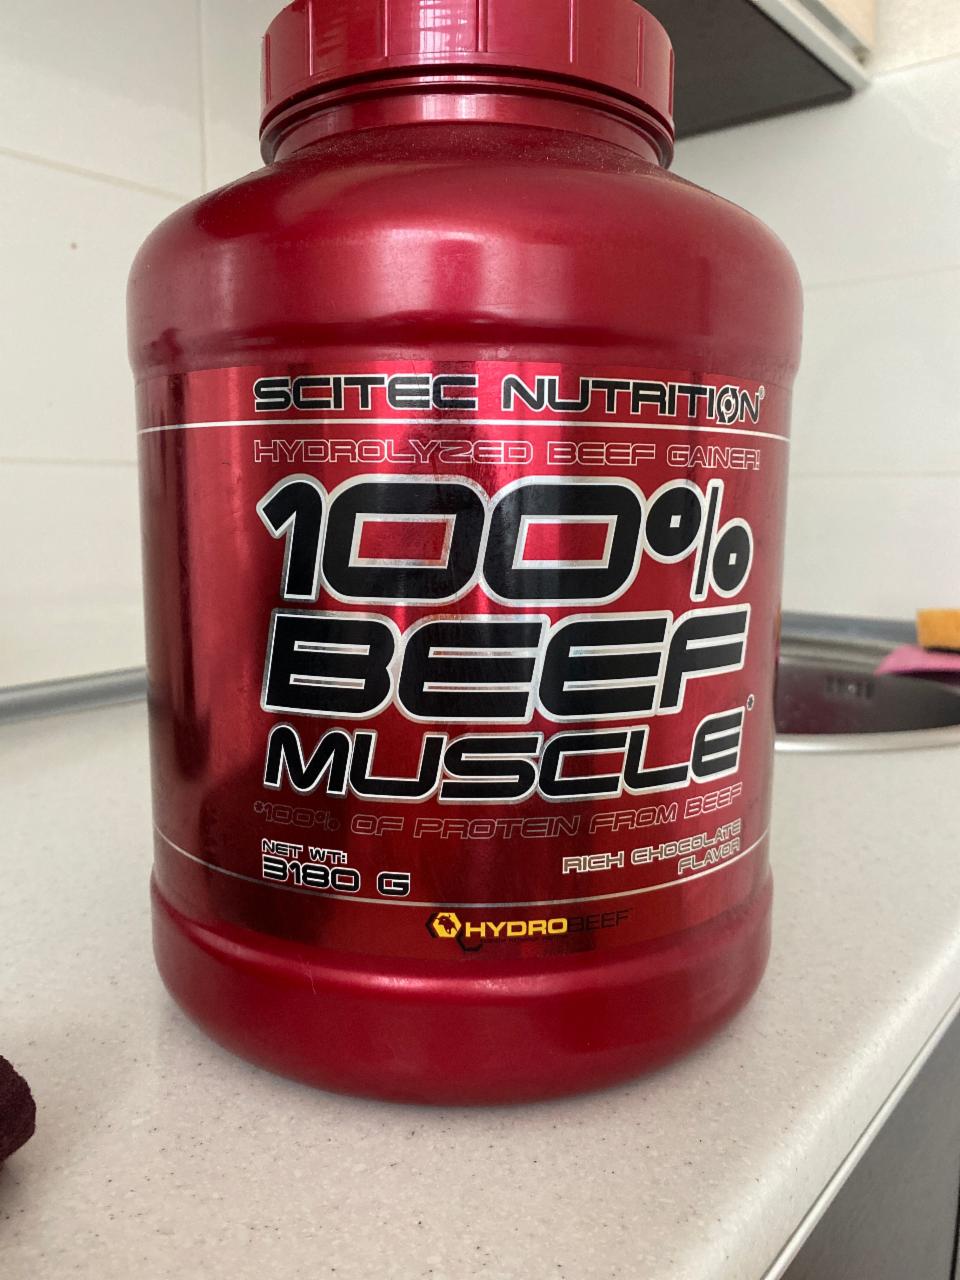 Фото - BEEF MUSCLE GAINER Scitec nutrion